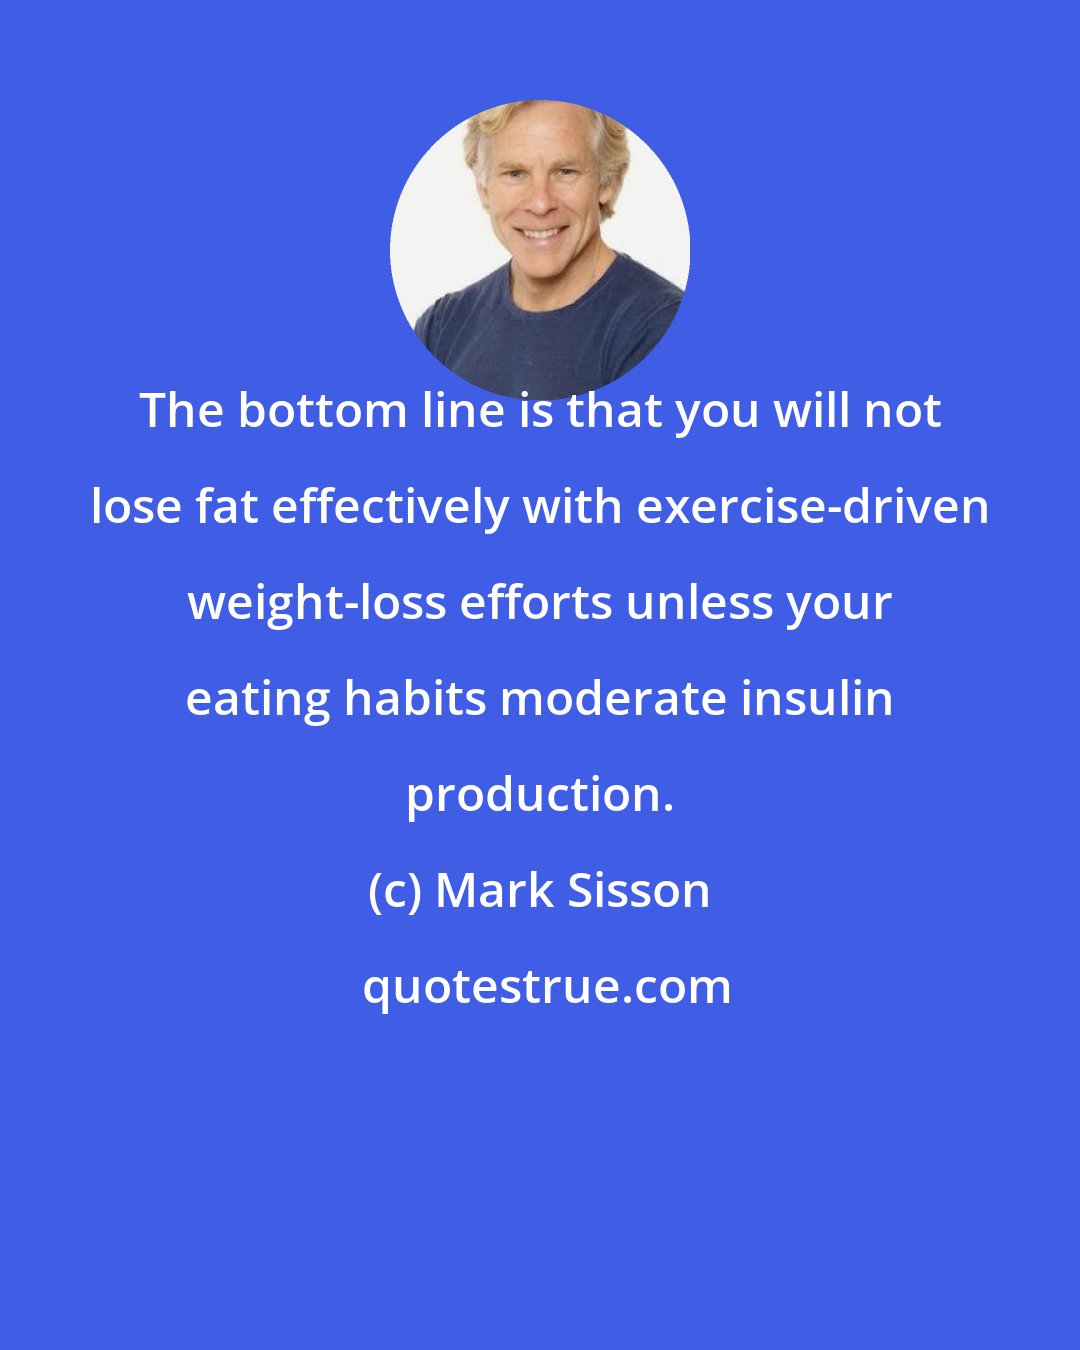 Mark Sisson: The bottom line is that you will not lose fat effectively with exercise-driven weight-loss efforts unless your eating habits moderate insulin production.